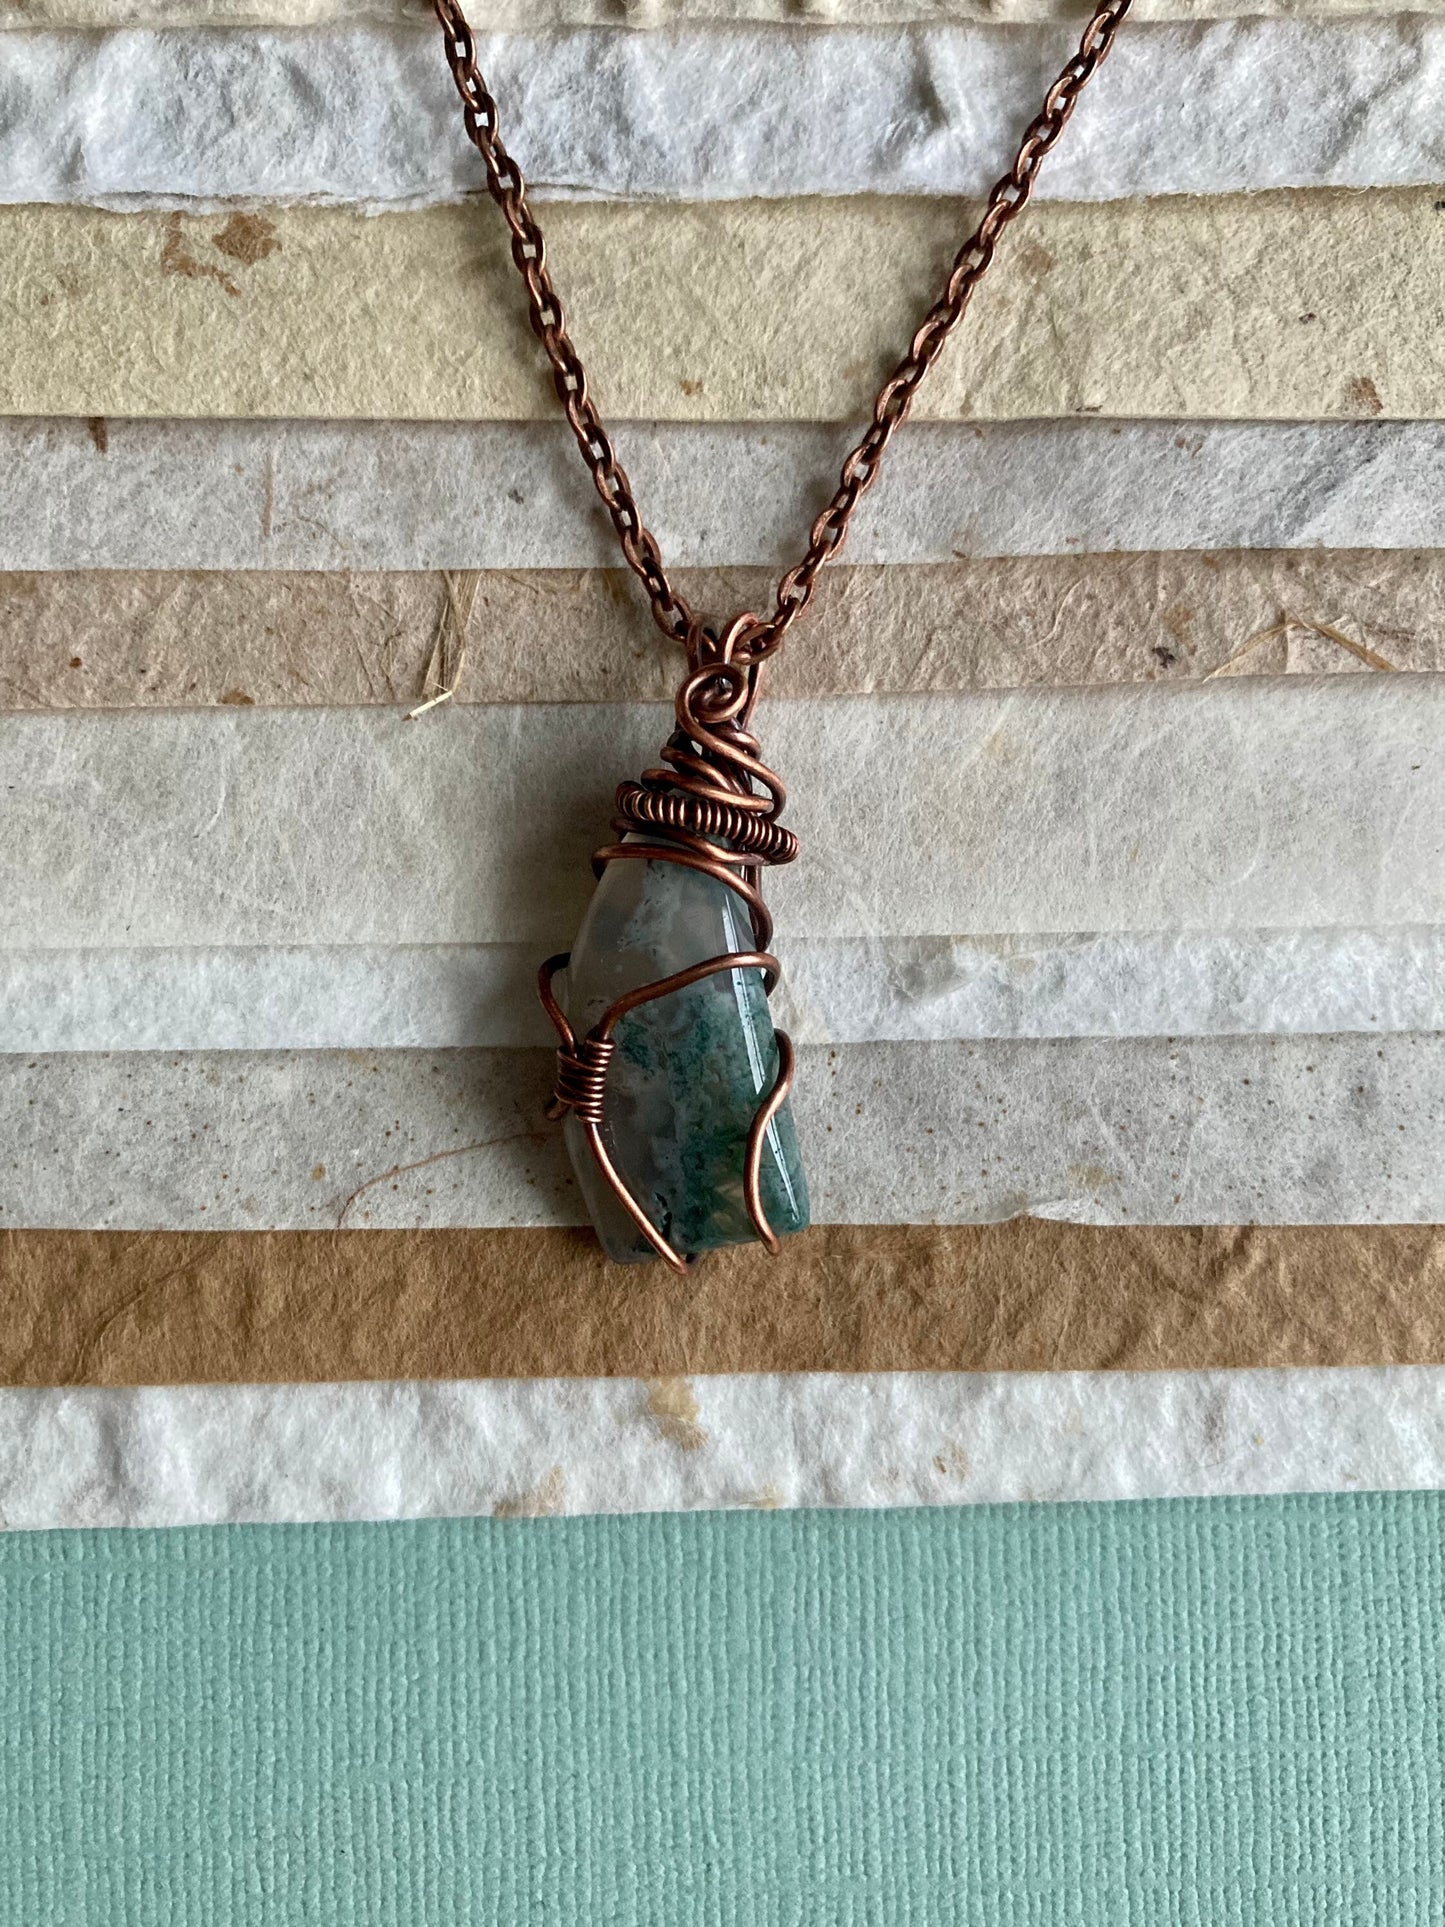 Moss agate pendant handmade necklace wire wrapped natural stone with 18 inch length chain